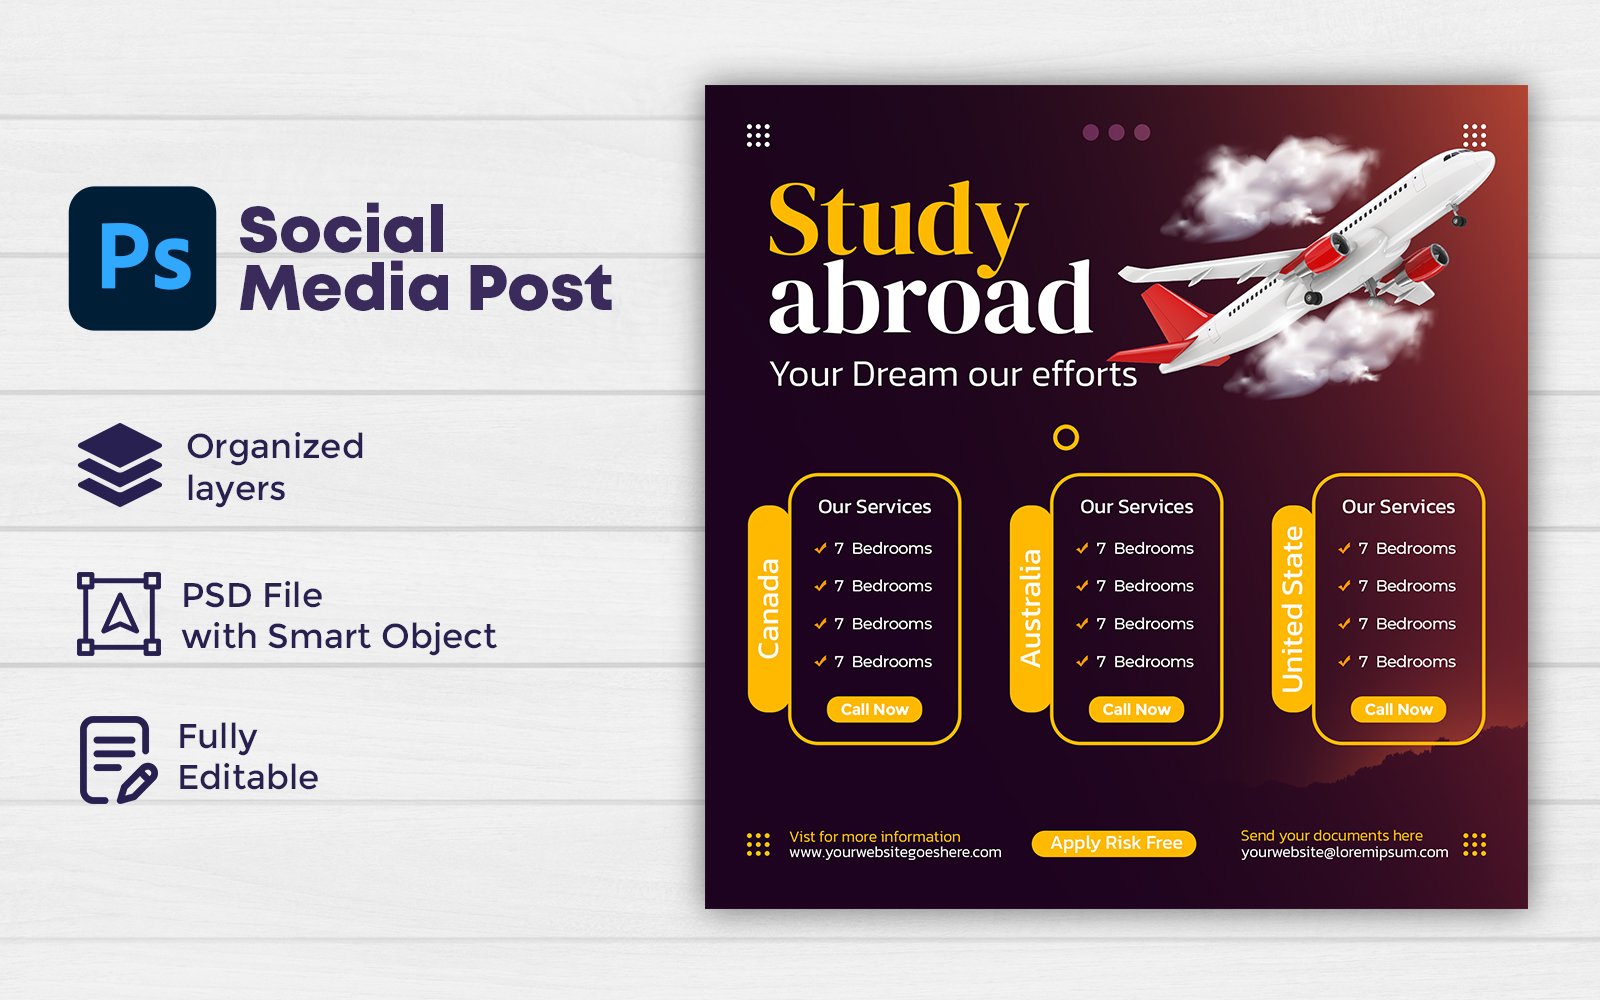 Study Abroad Instagram Post Or Social Media Post Template Design 2